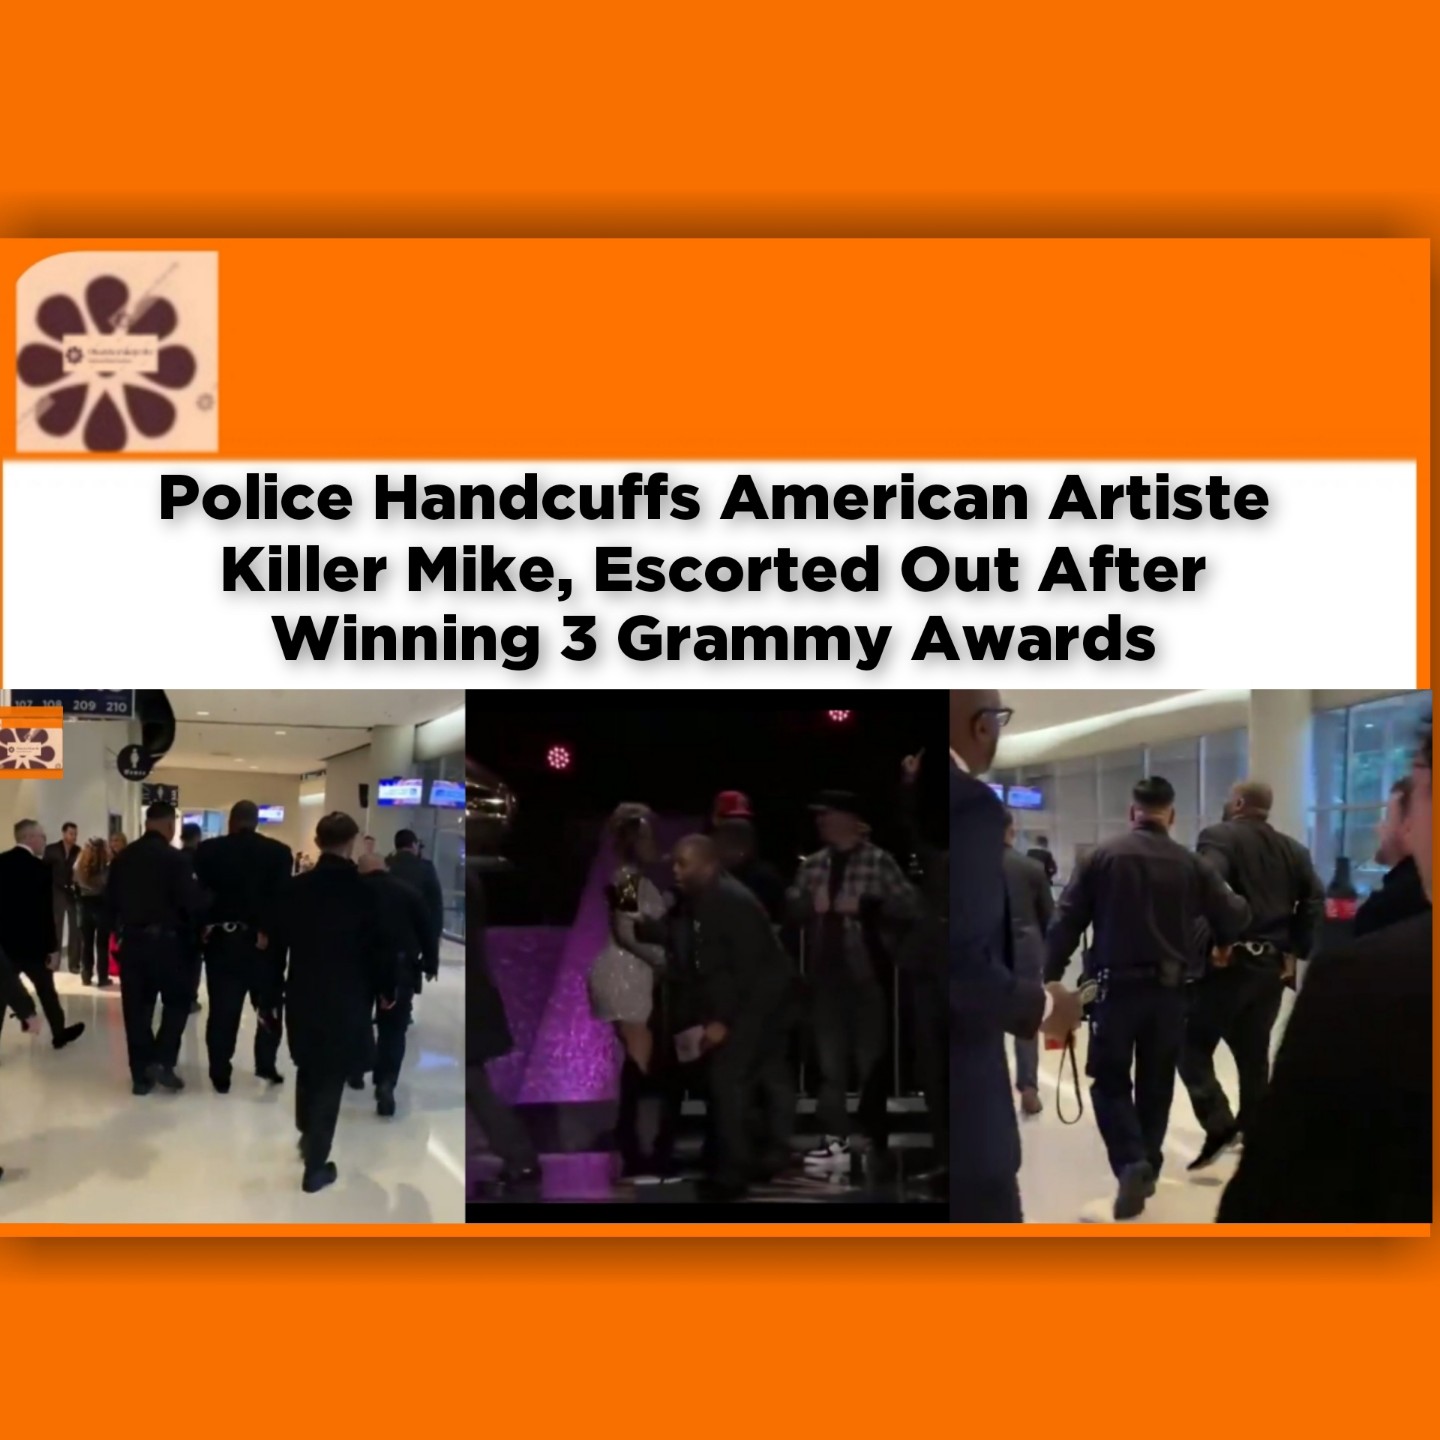 Police Handcuffs American Artiste Killer Mike, Escorted Out After Winning 3 Grammy Awards ~ OsazuwaAkonedo #America #grammy #Killer #Mike #Police